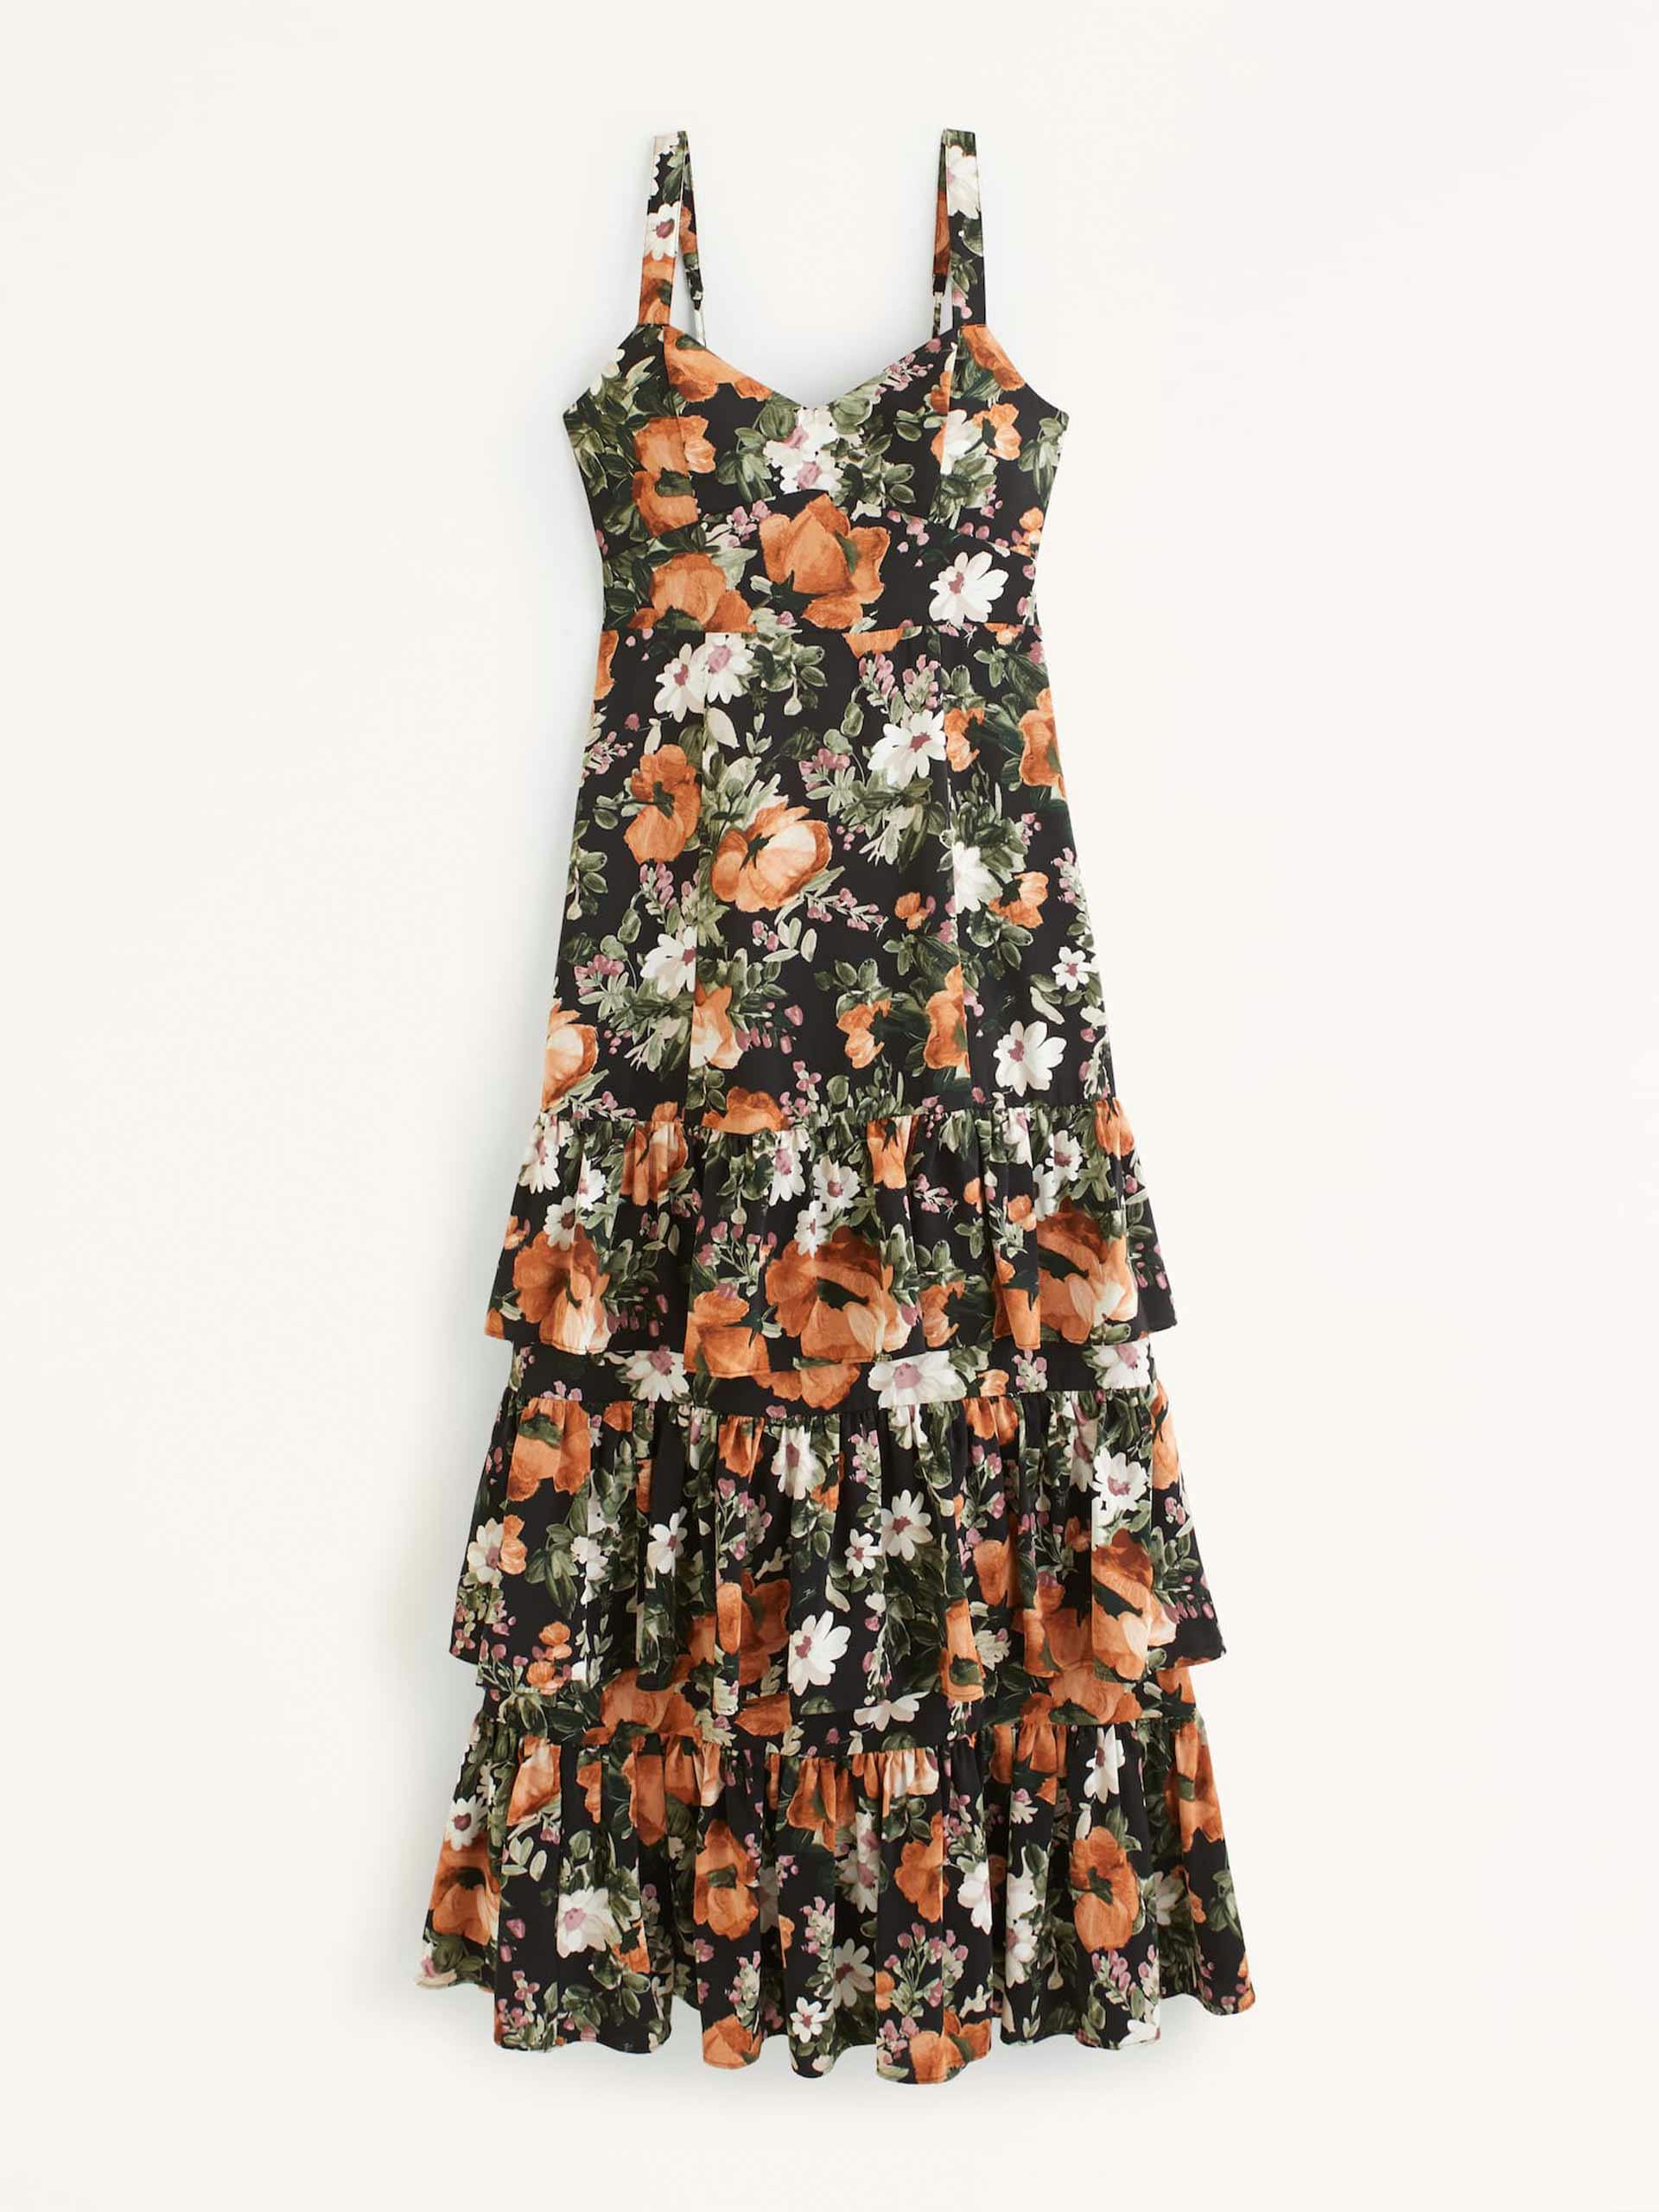 Ruffled tiered maxi dress in Black Floral